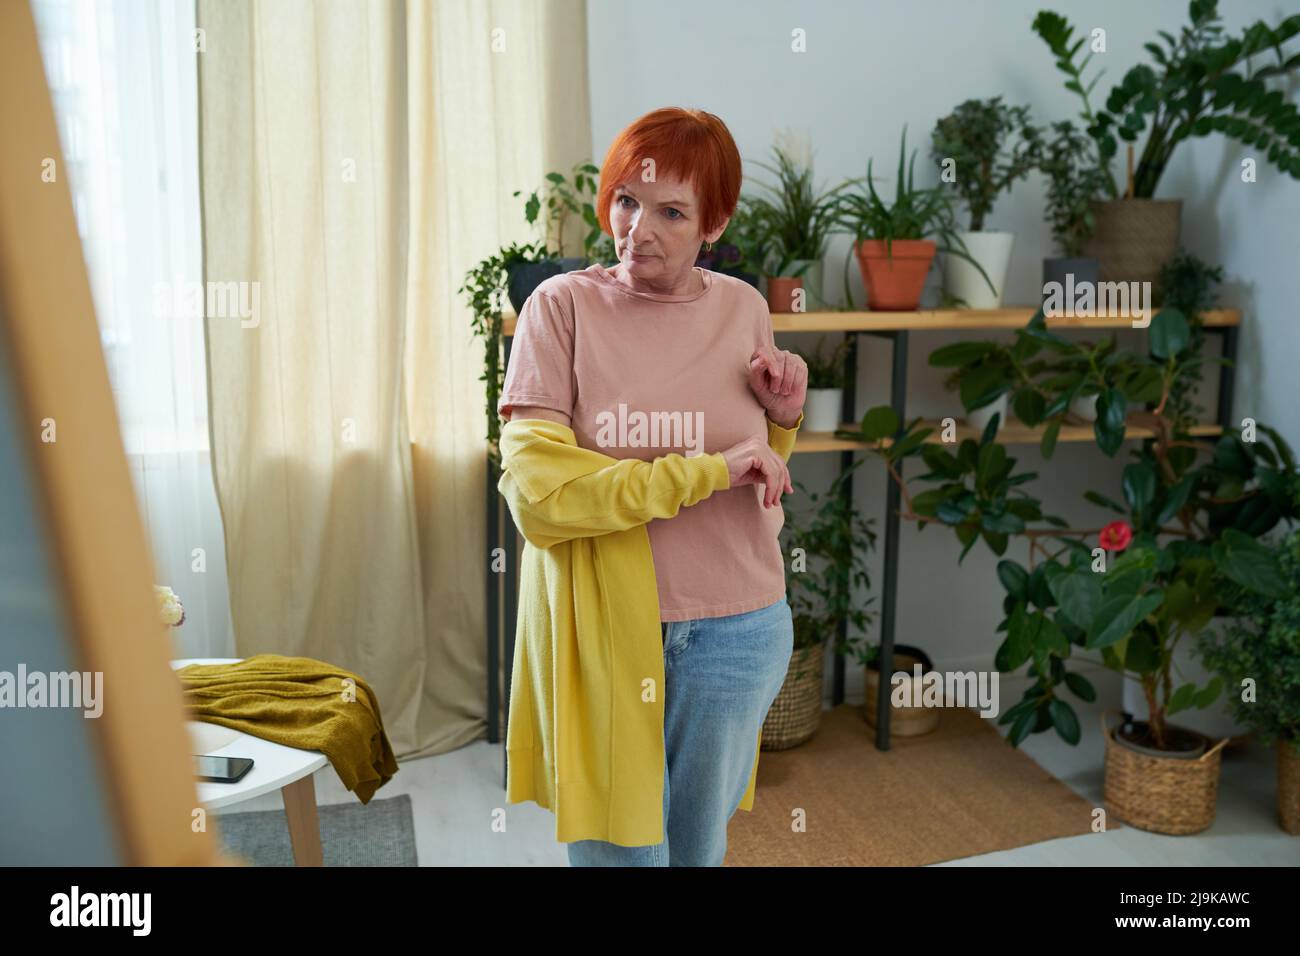 Elderly elegant woman standing in front of mirror and admiring herself while trying on new cardigan in room with house plants in background Stock Photo